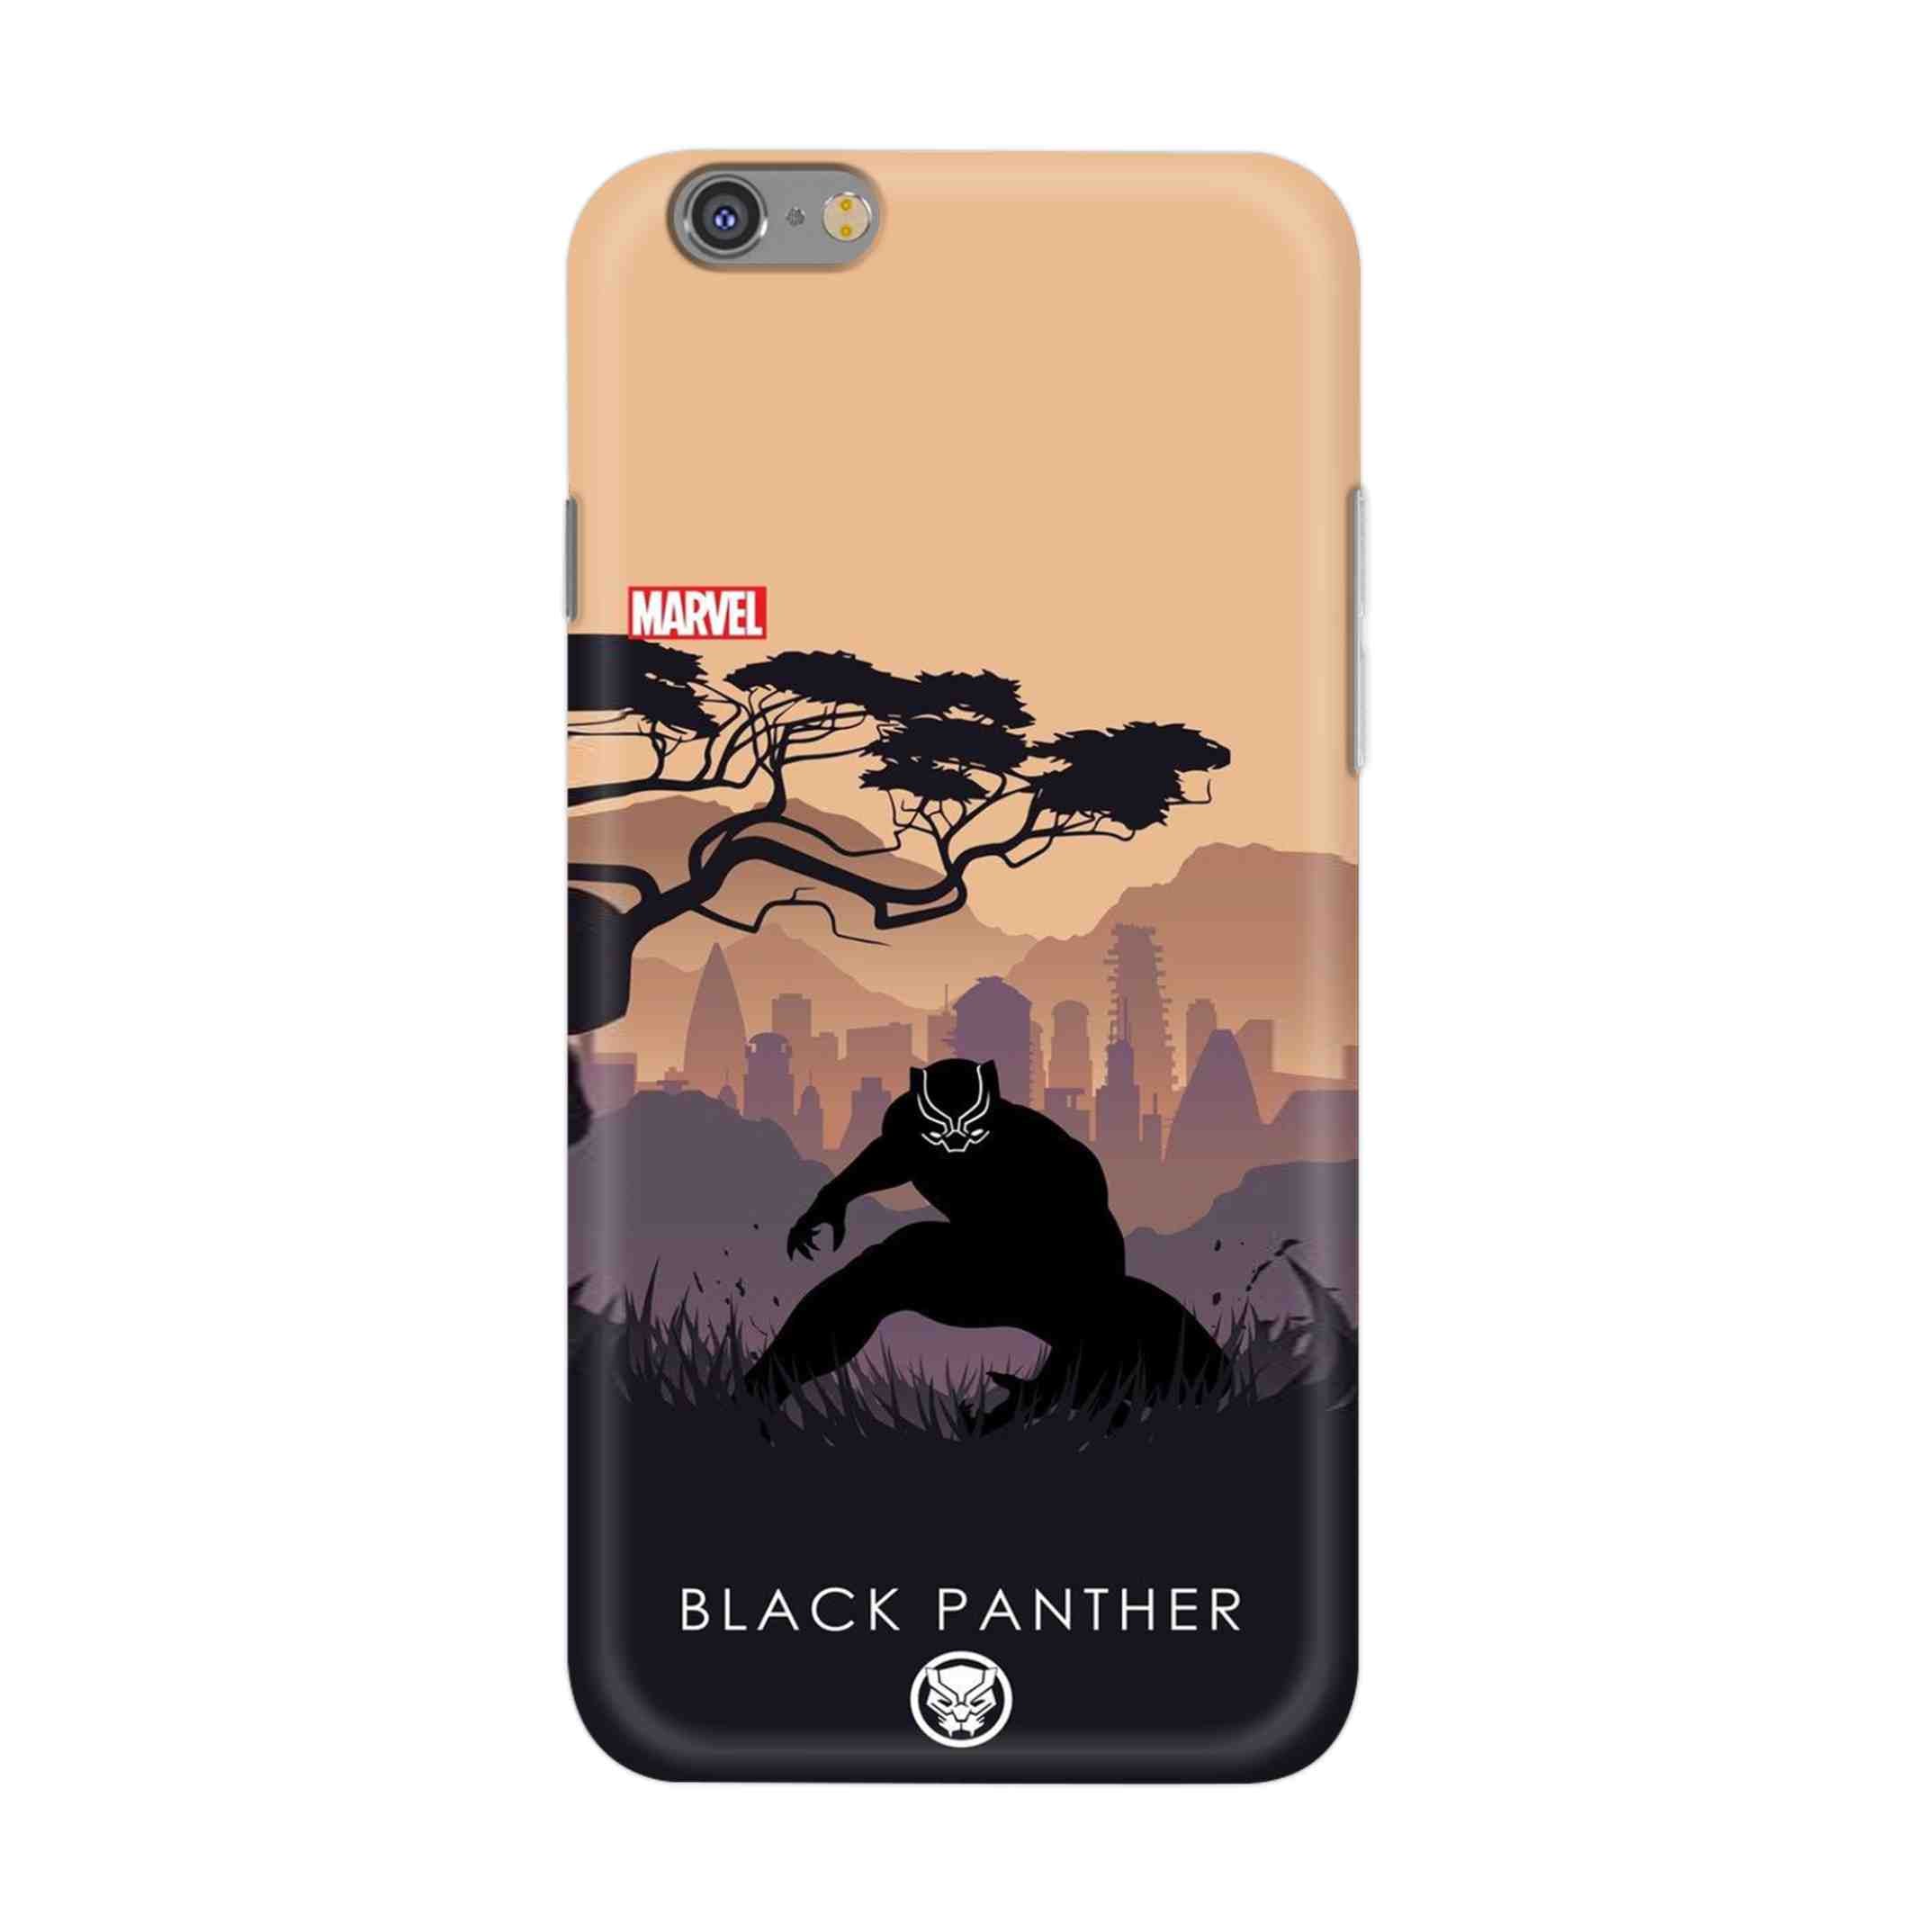 Buy  Black Panther Hard Back Mobile Phone Case/Cover For iPhone 6 Plus / 6s Plus Online